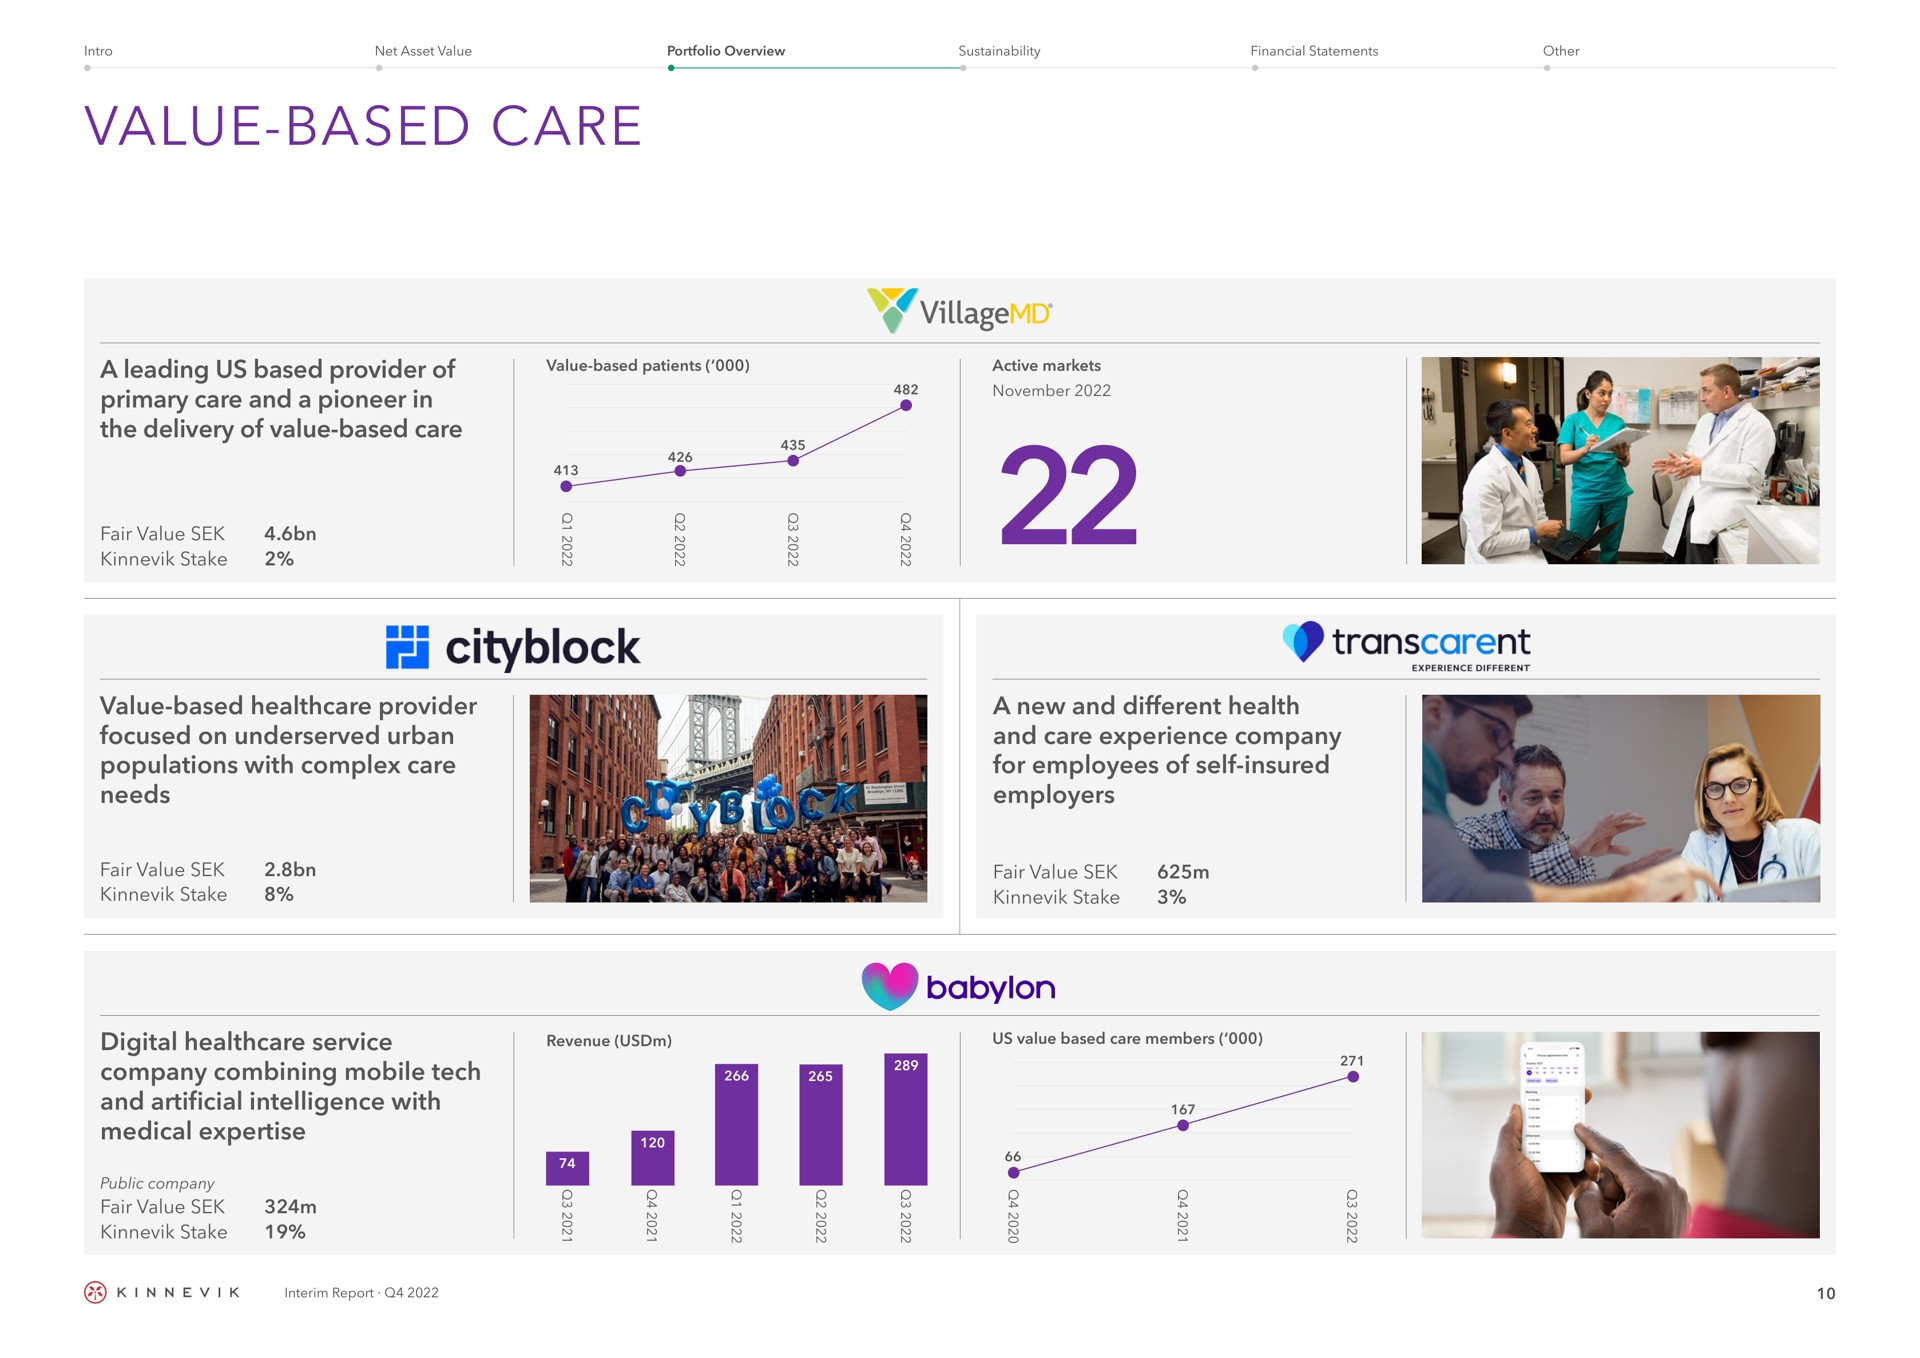 value based care a leading us based provider of primary care and a pioneer in the delivery of value based care value based provider focused on urban populations with complex care needs a new and different health and care experience company for employees of self insured employers digital service company combining mobile tech and artificial intelligence with medical village fair value stake stake revenue anew | Kinnevik